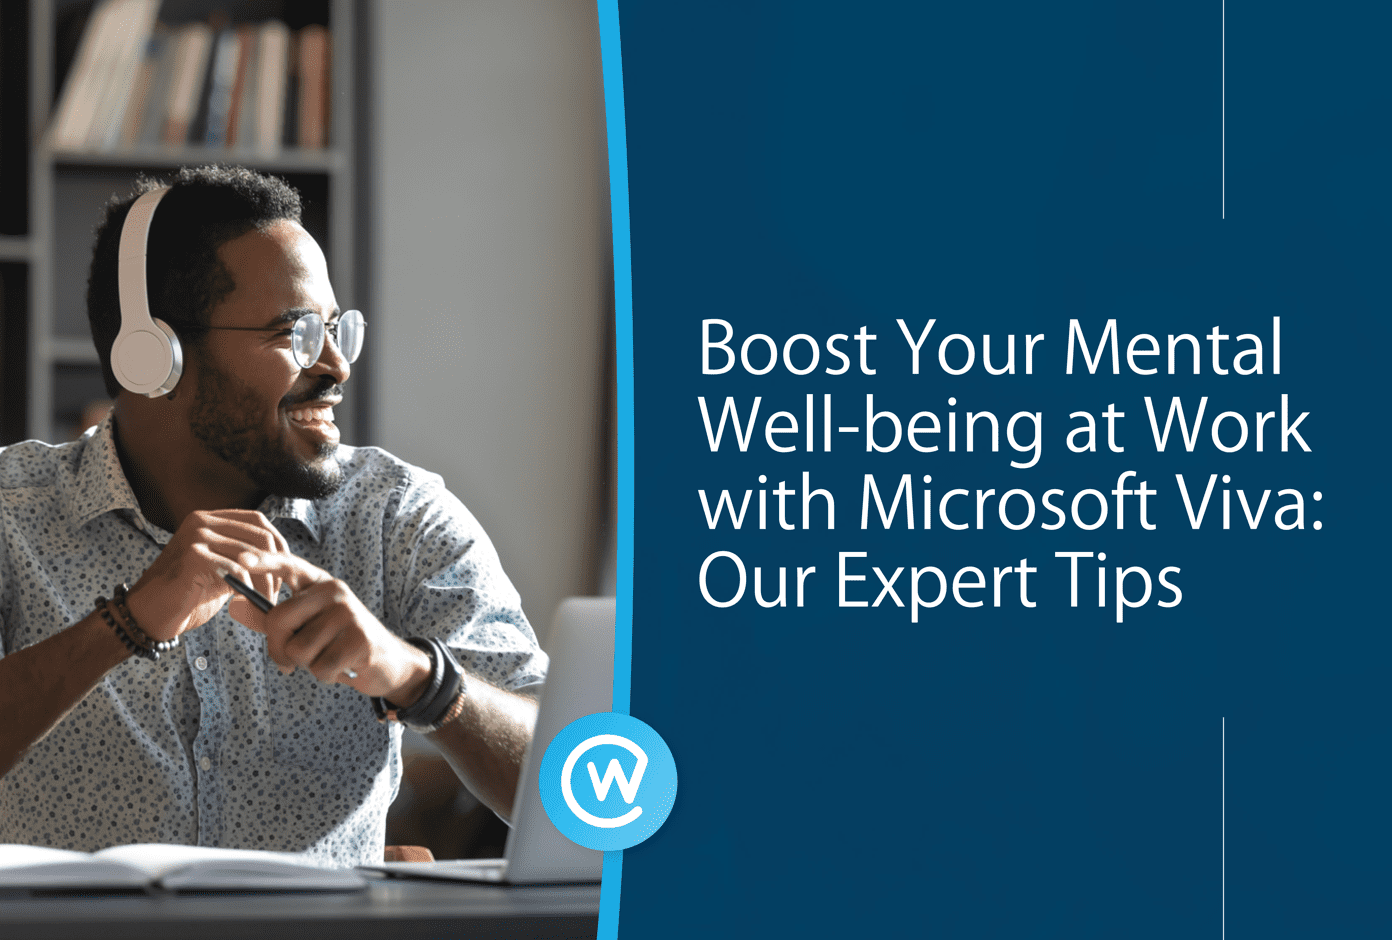 Boost Your Mental Well-being at Work with Microsoft Viva: Our Expert Tips